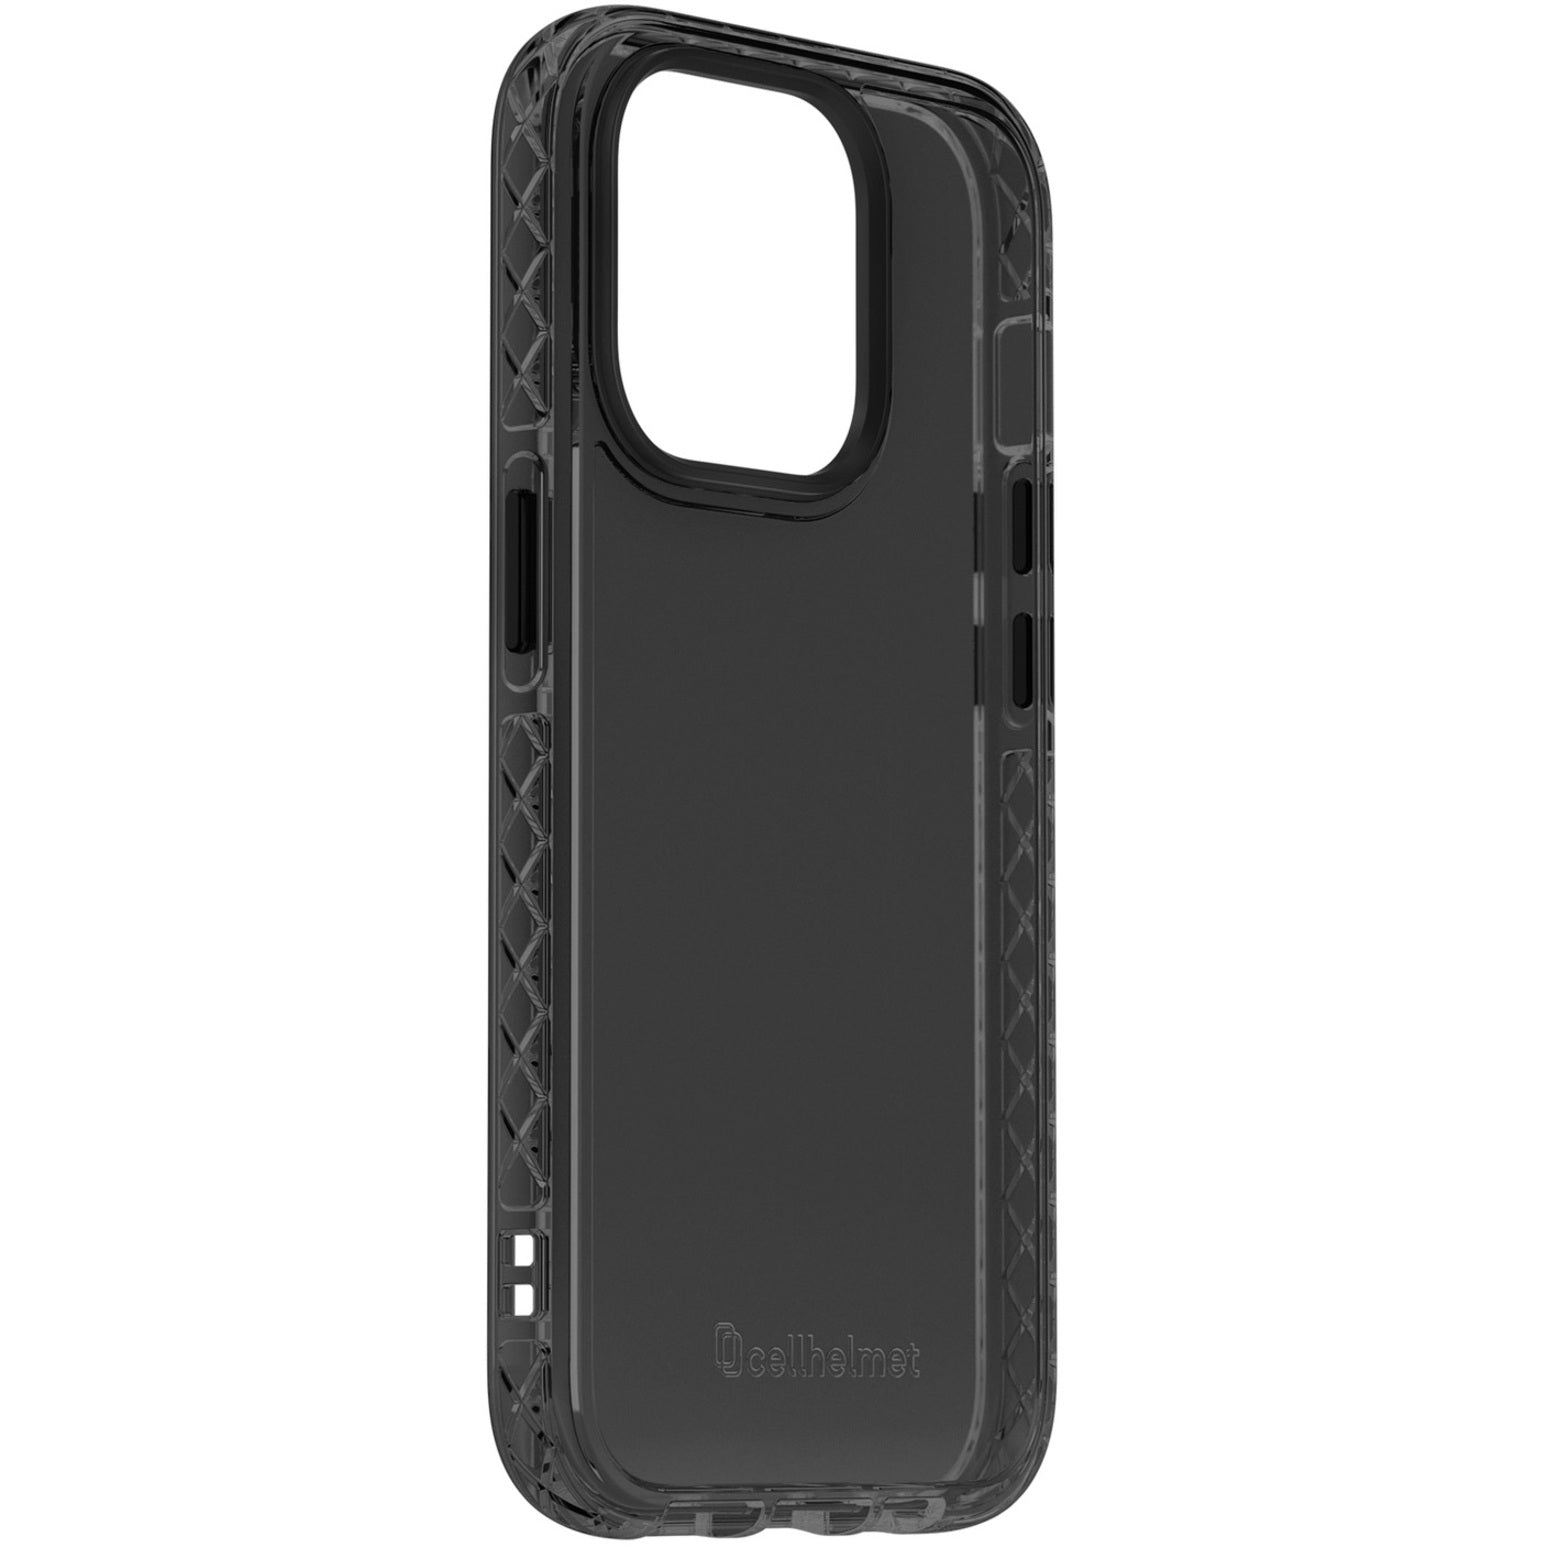 Altitude X Pro Series Phone Case for iPhone 14 Pro Max, 6.7-Inch 2022 (Onyx Black) [Discontinued]